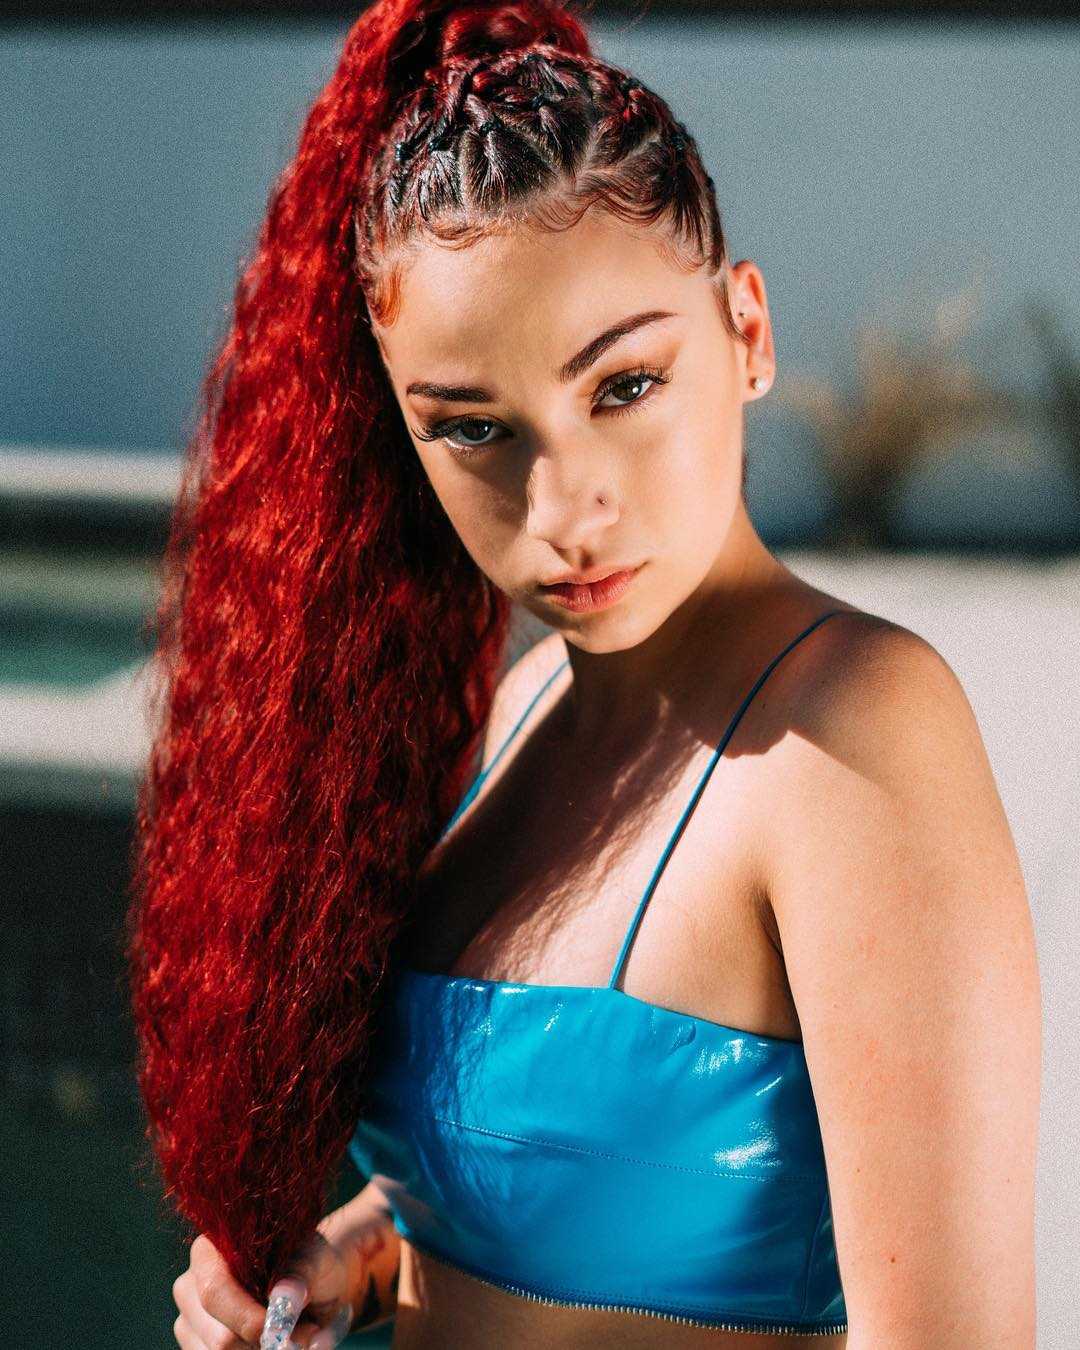 70+ Hot Pictures Of Danielle Bregoli aka Bhad Bhabie Which Will Win Your Heart 3